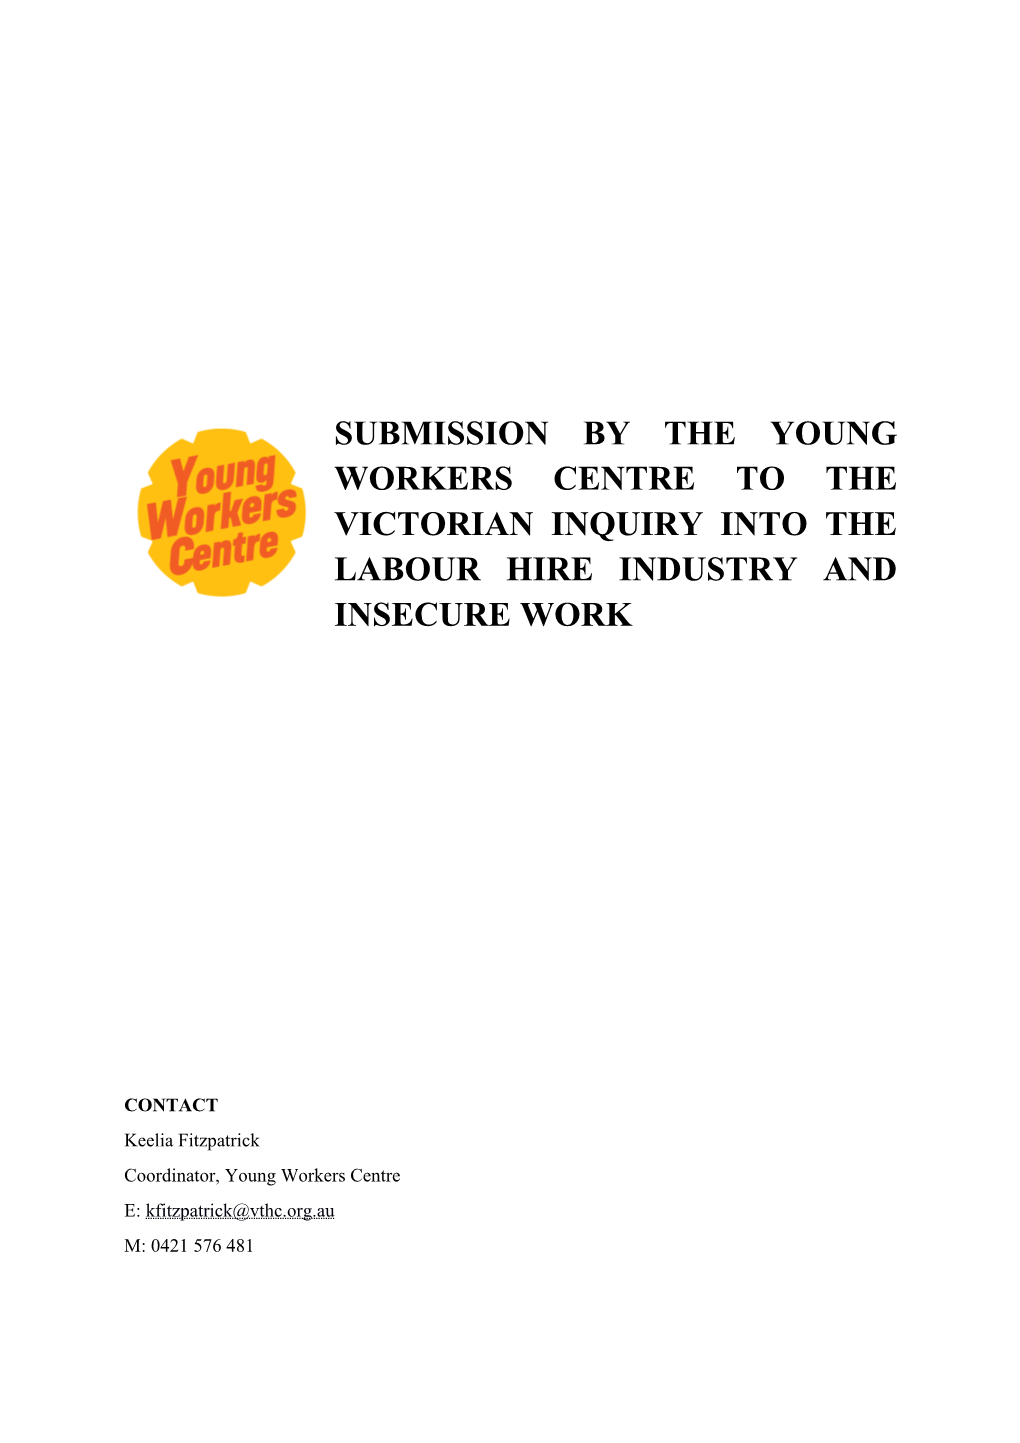 About the Young Workers Centre